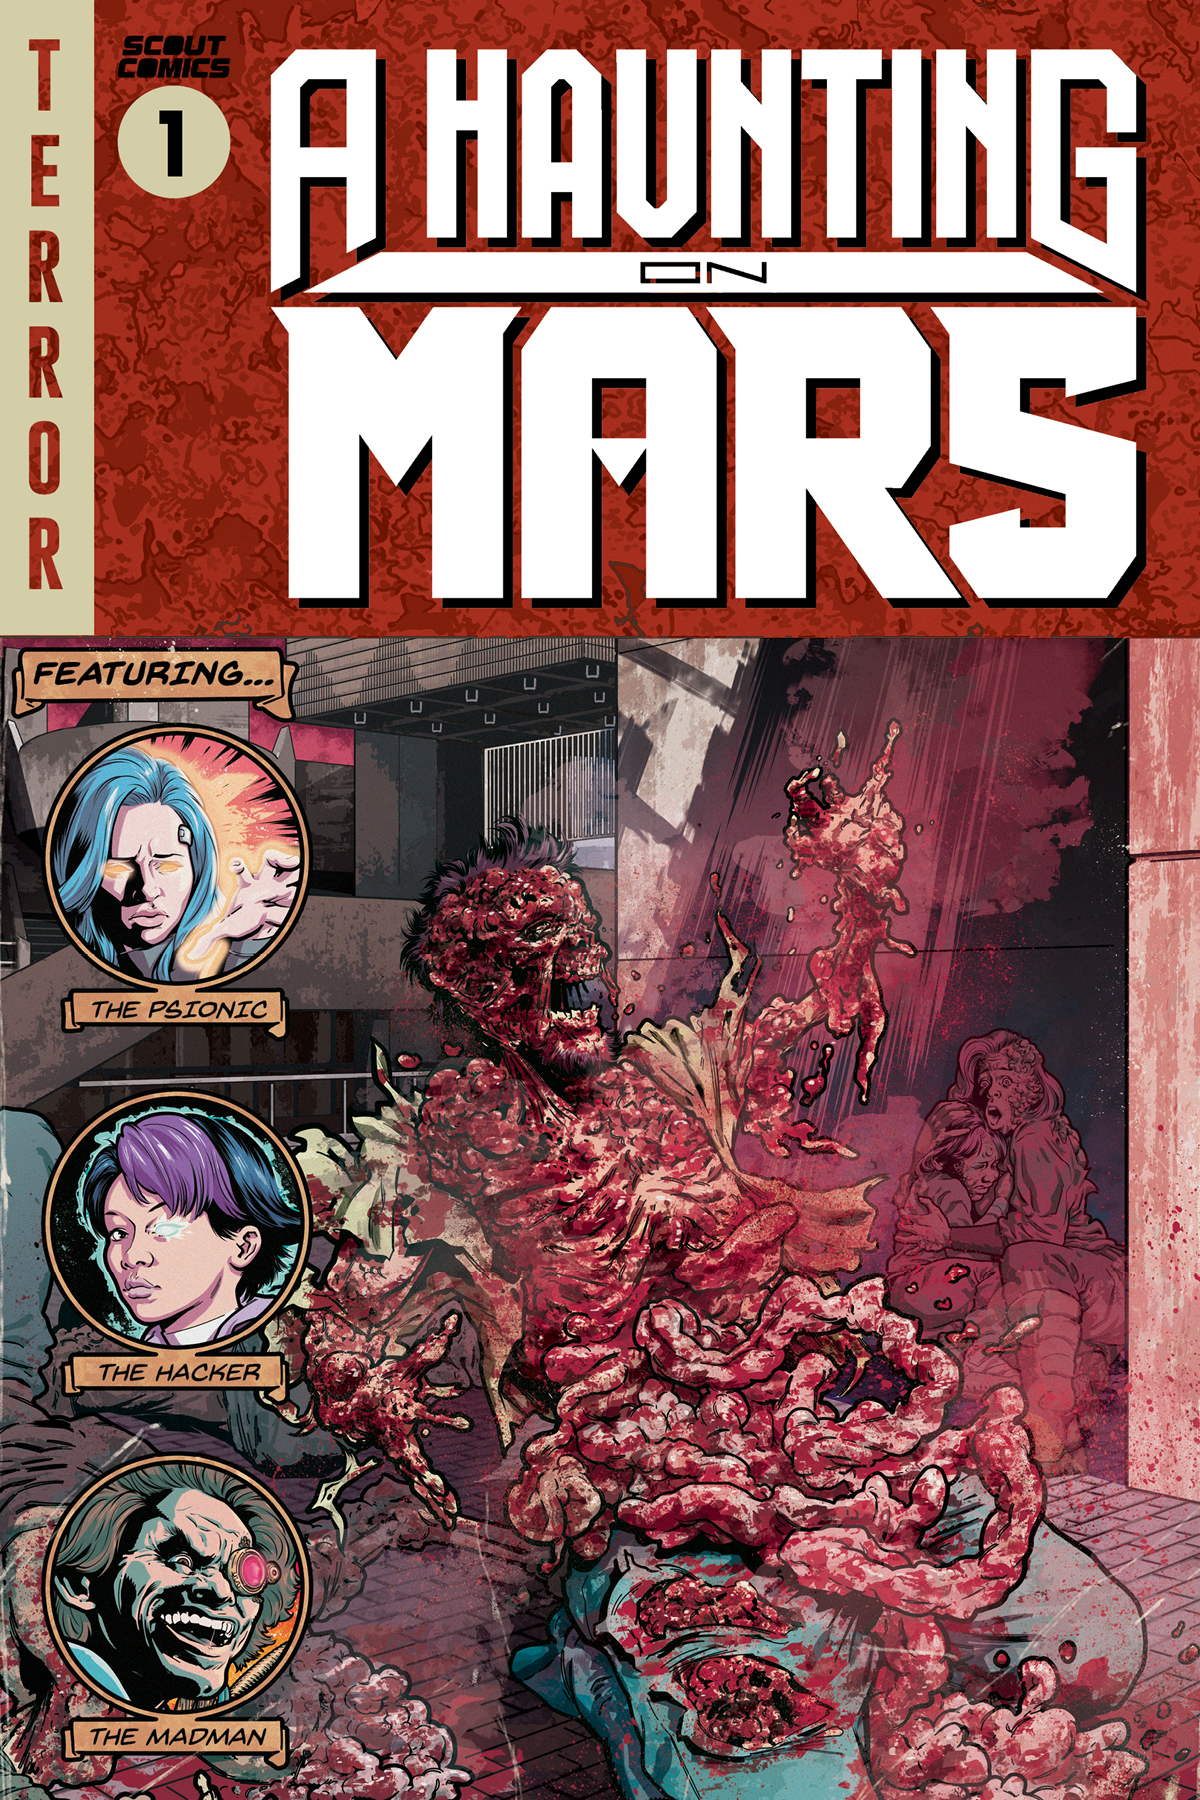 A Haunting on Mars #1 Cover A Hugo Petrus